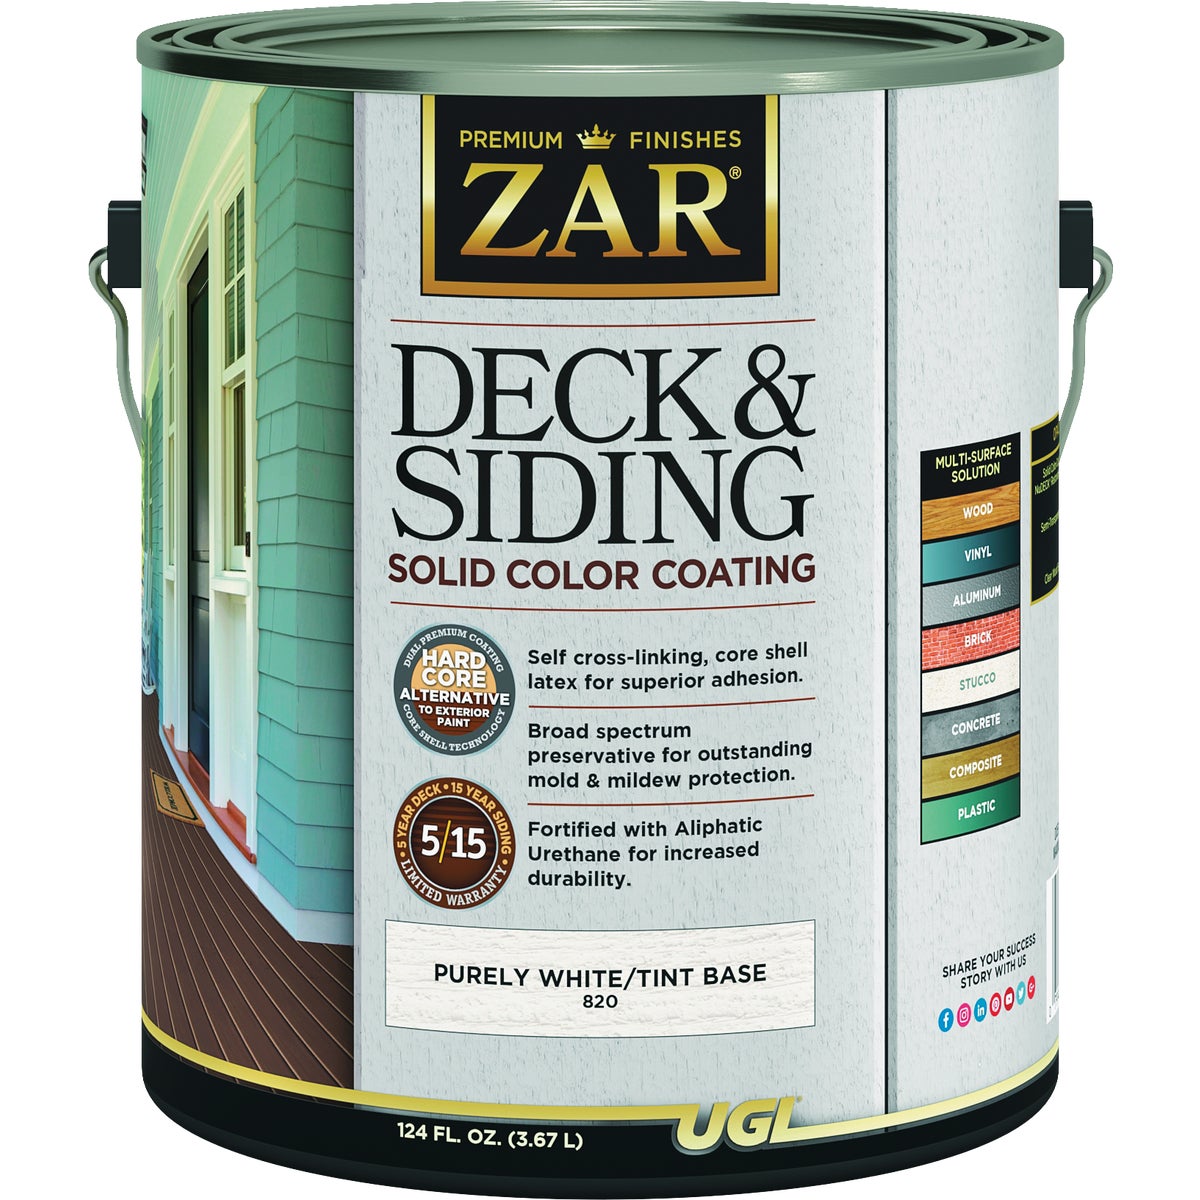 ZAR Solid Deck & Siding Coating, Purely White/Light Tint Base, 1 Gal.